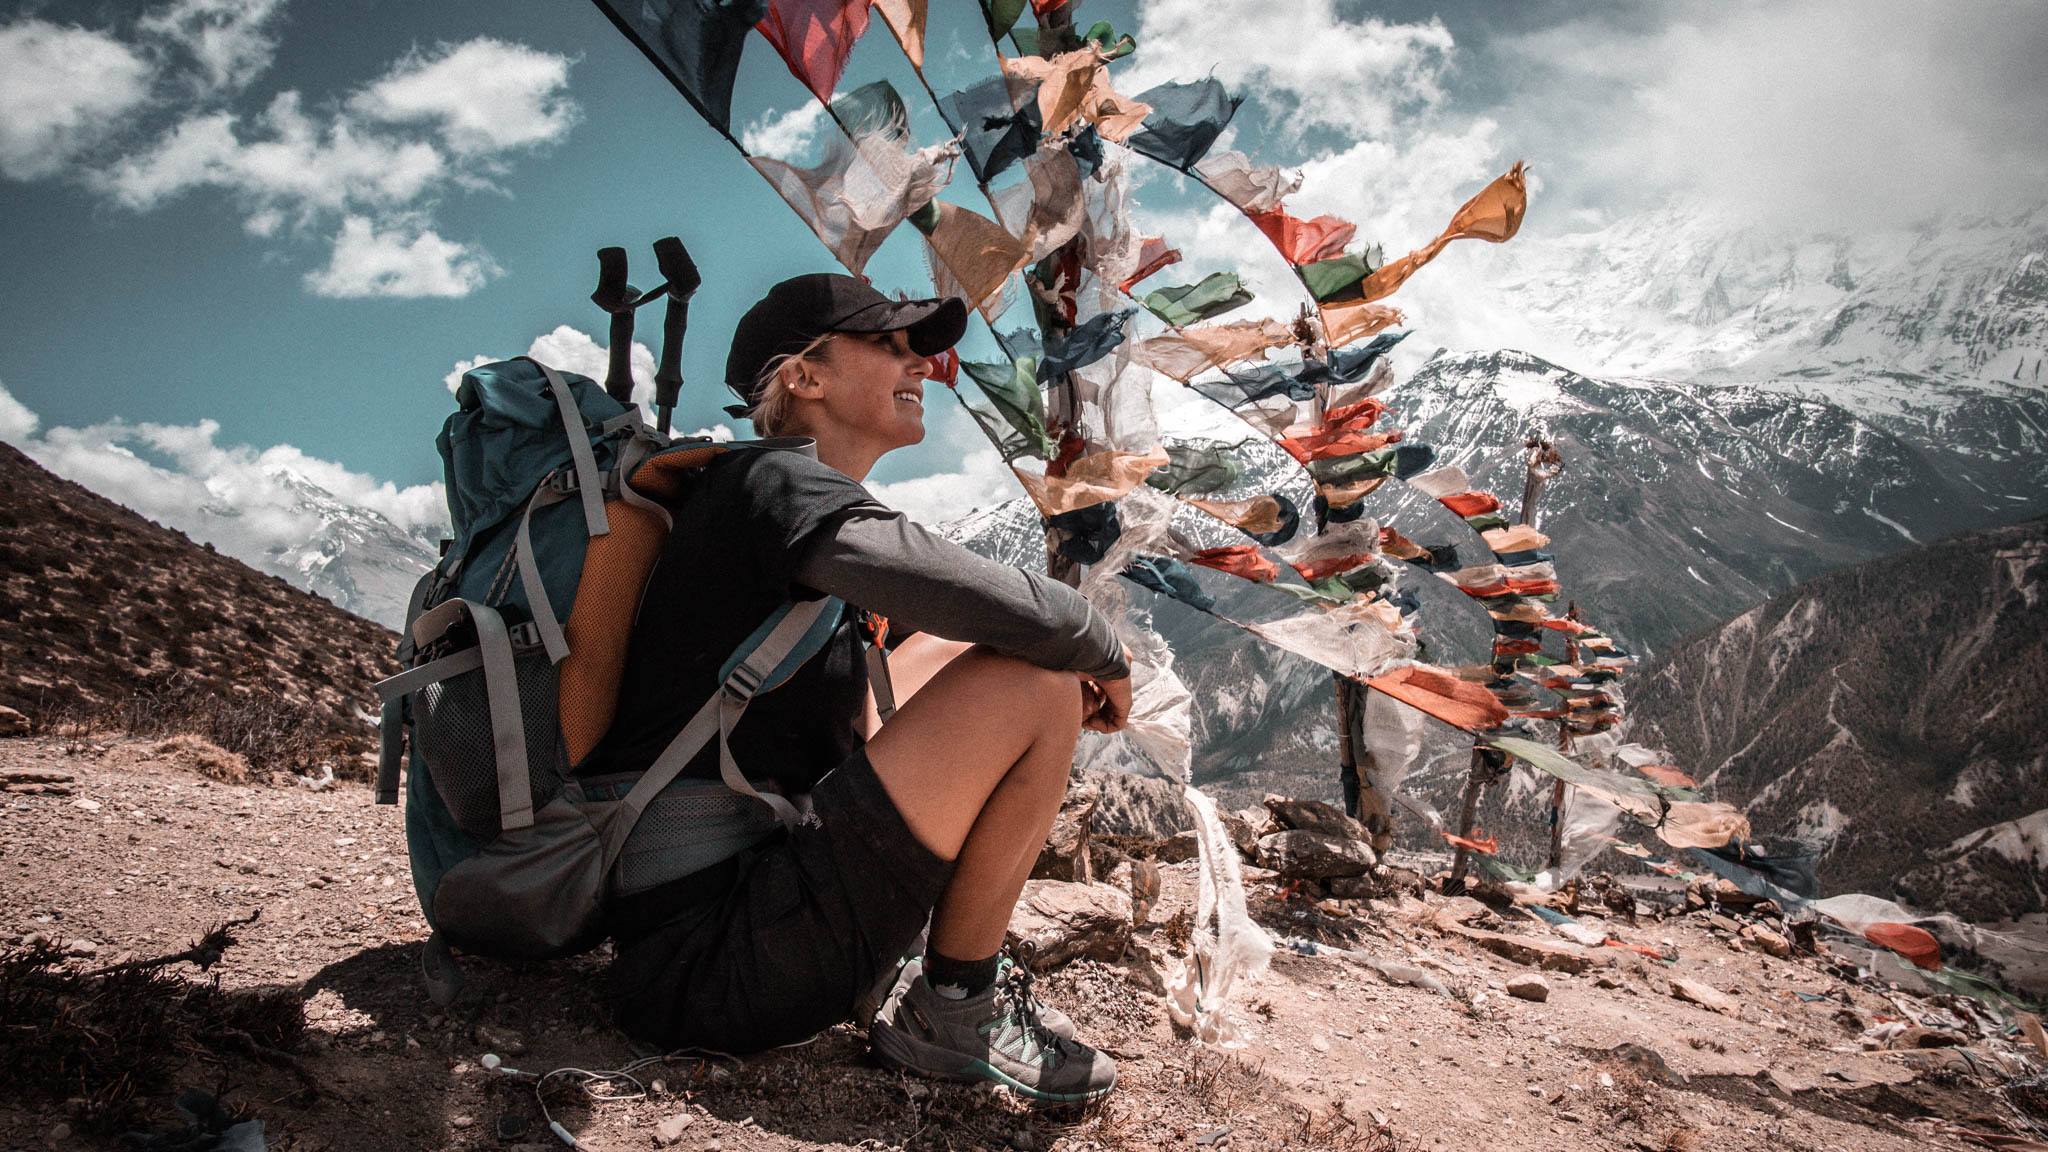 Hiking Nepal on a detour to adventure